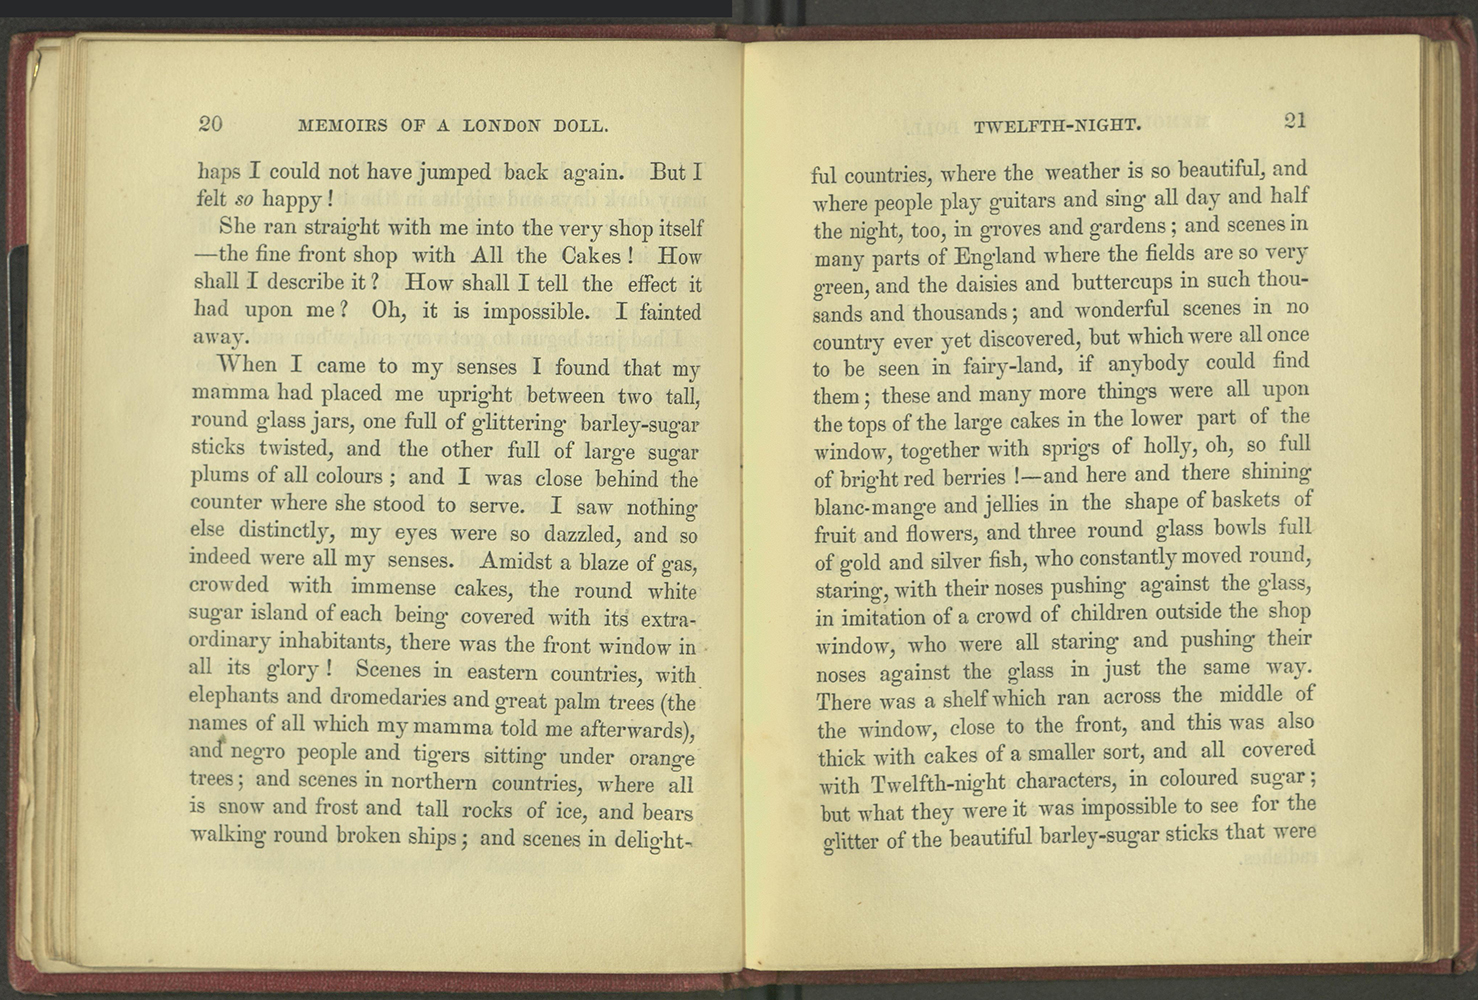 Pages 20-21, describing the pastry shop at Twelfth Night.